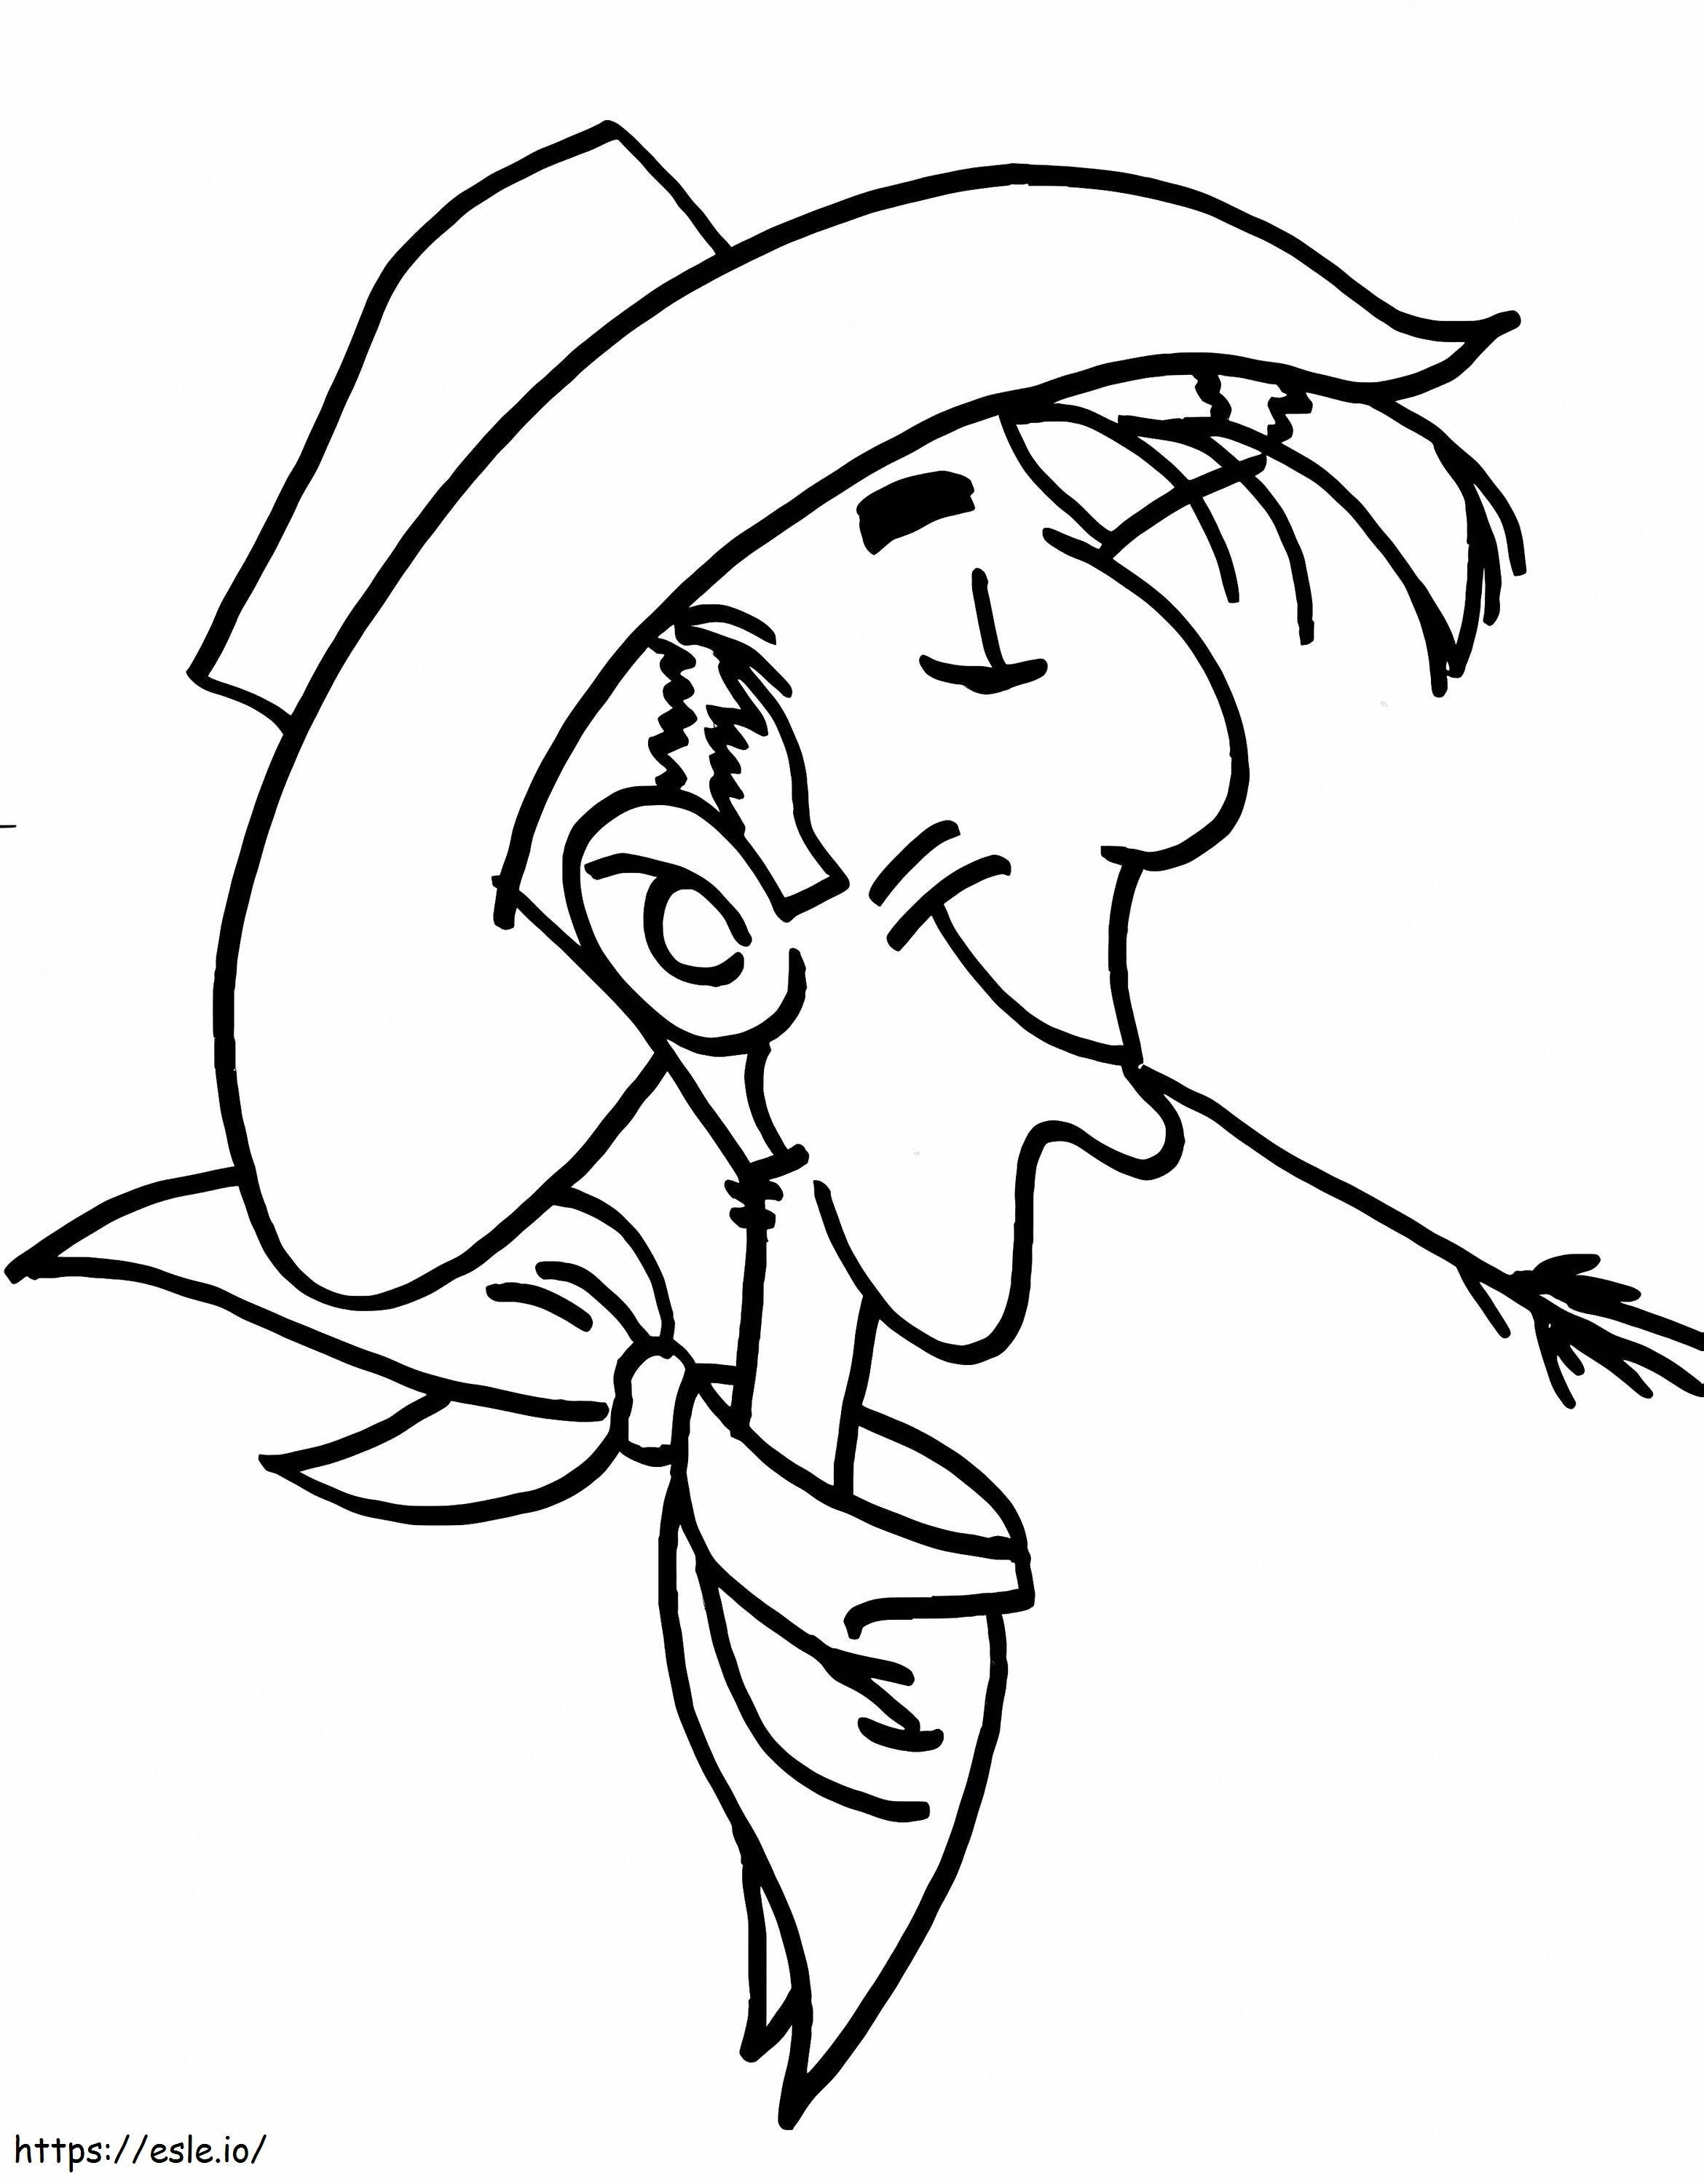 Lucky Luke 2 coloring page